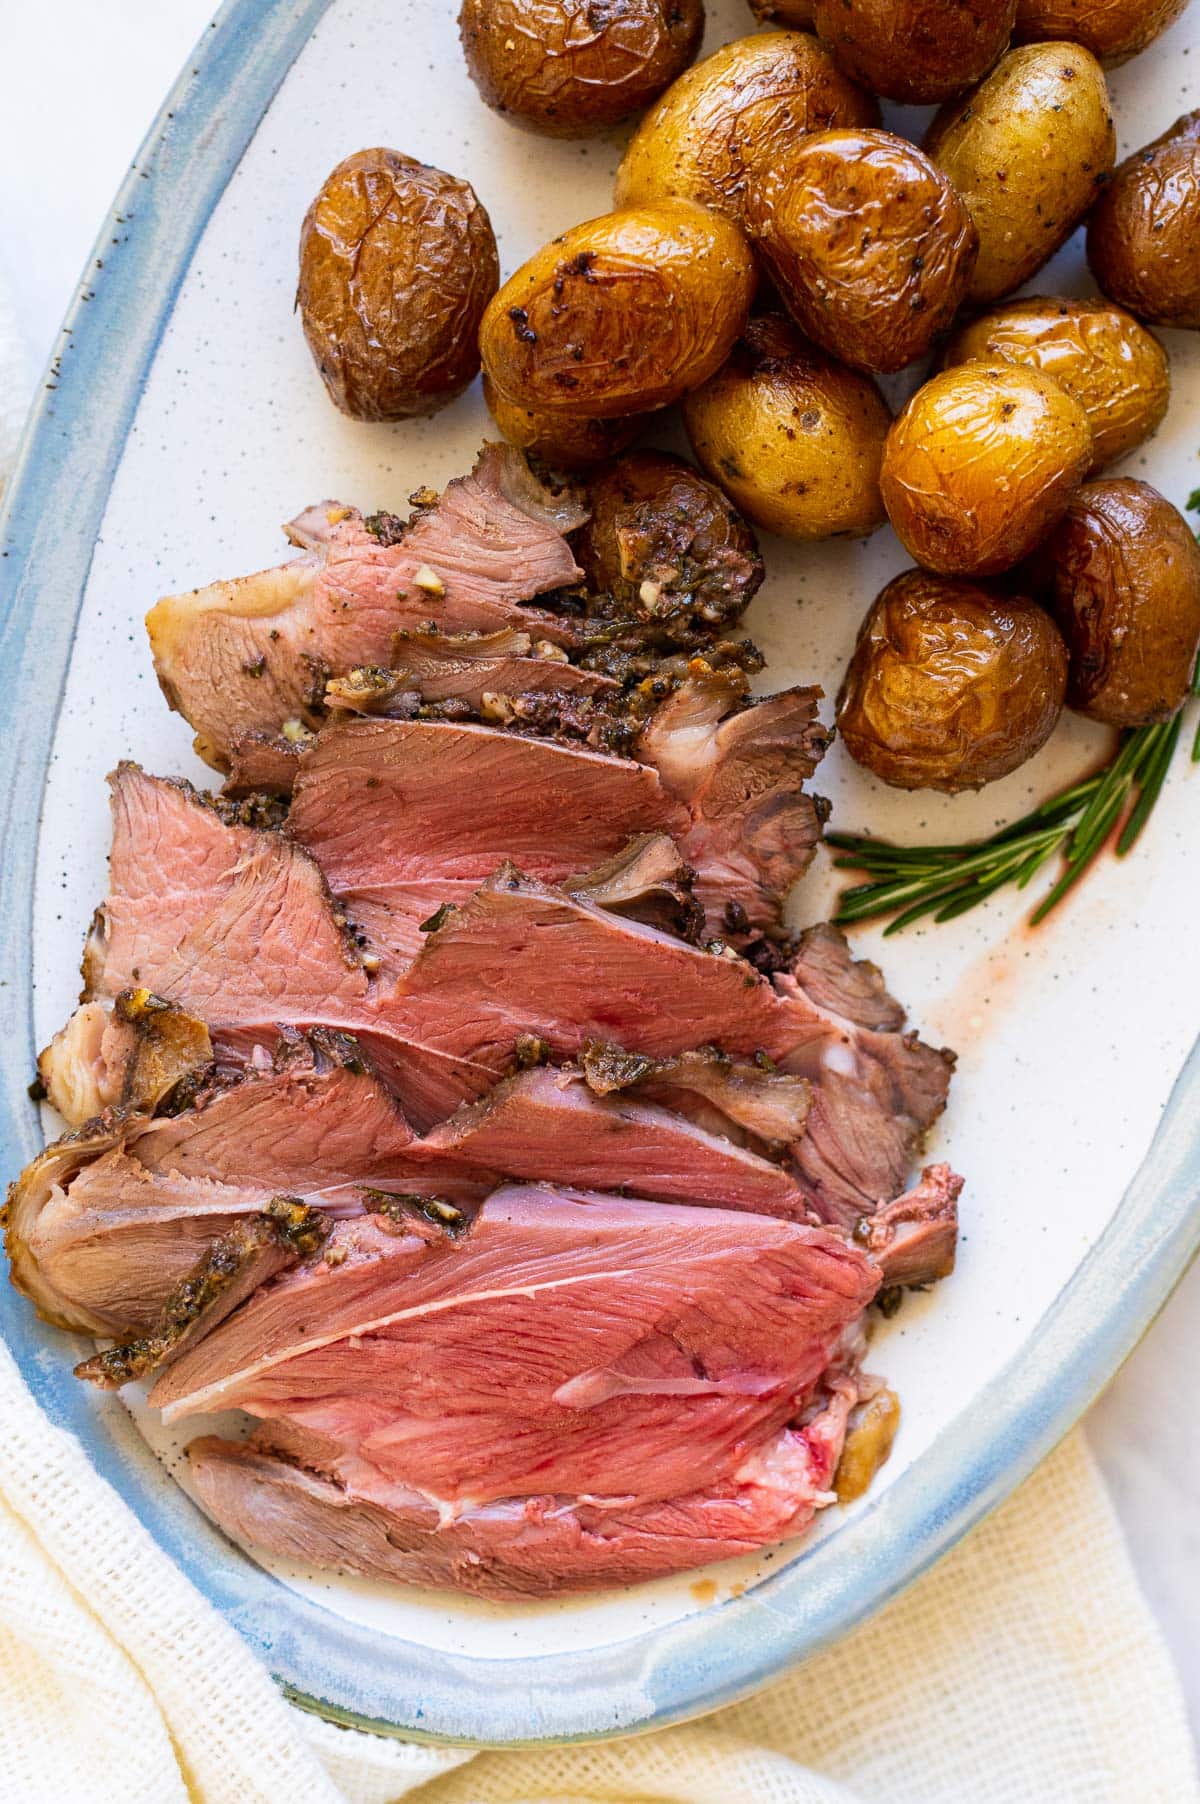 Roasted leg of lamb slices served with baby potatoes on a platter.